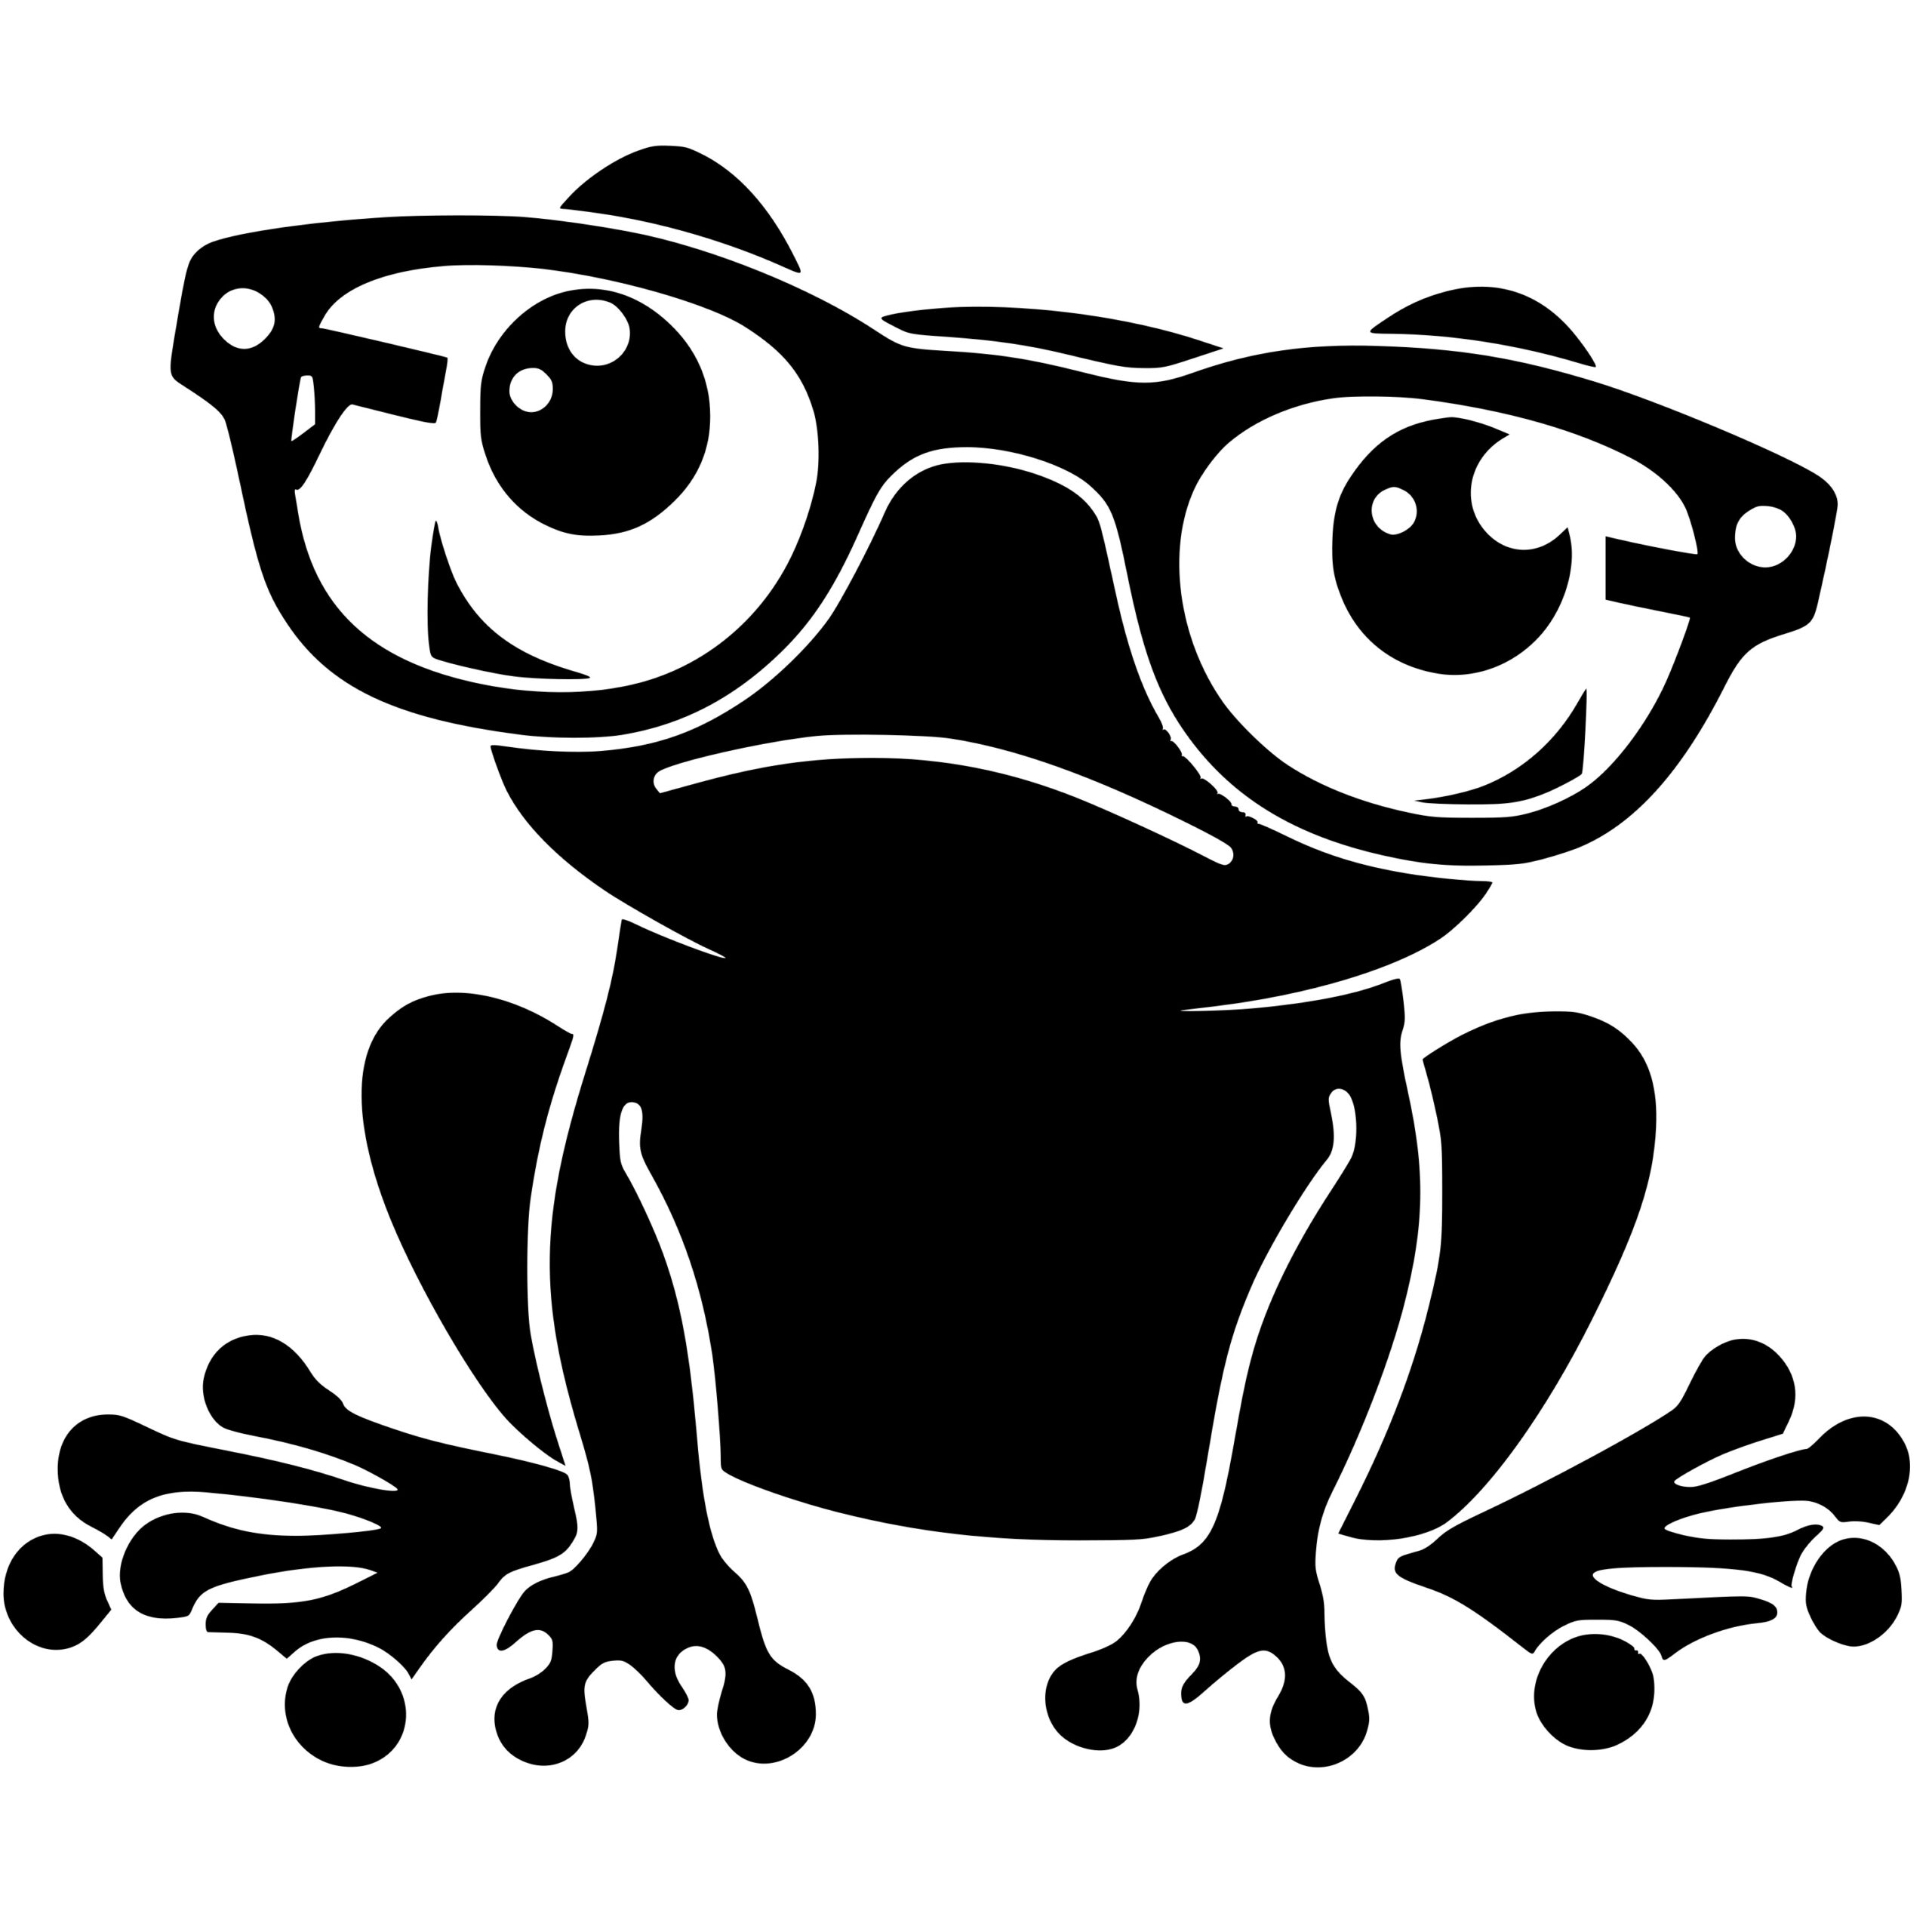 Frog With Glasses Adorable SVG Image for Cricut, Silhouette, Laser